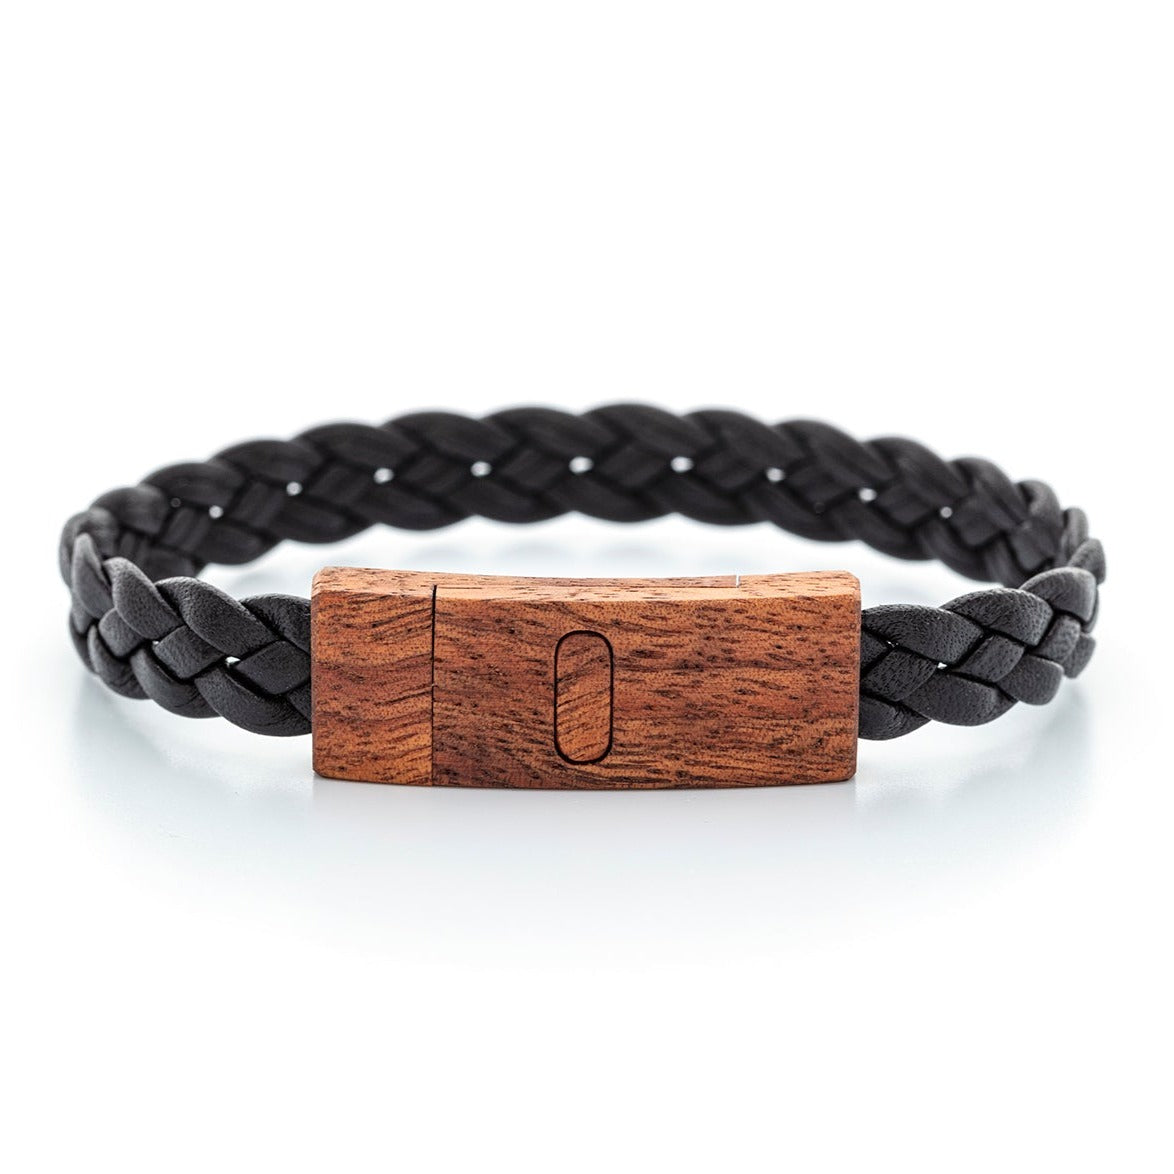 Handmade Wooden Bracelet - Wooden Clasp with Braided Leather Band by Davin & Kesler